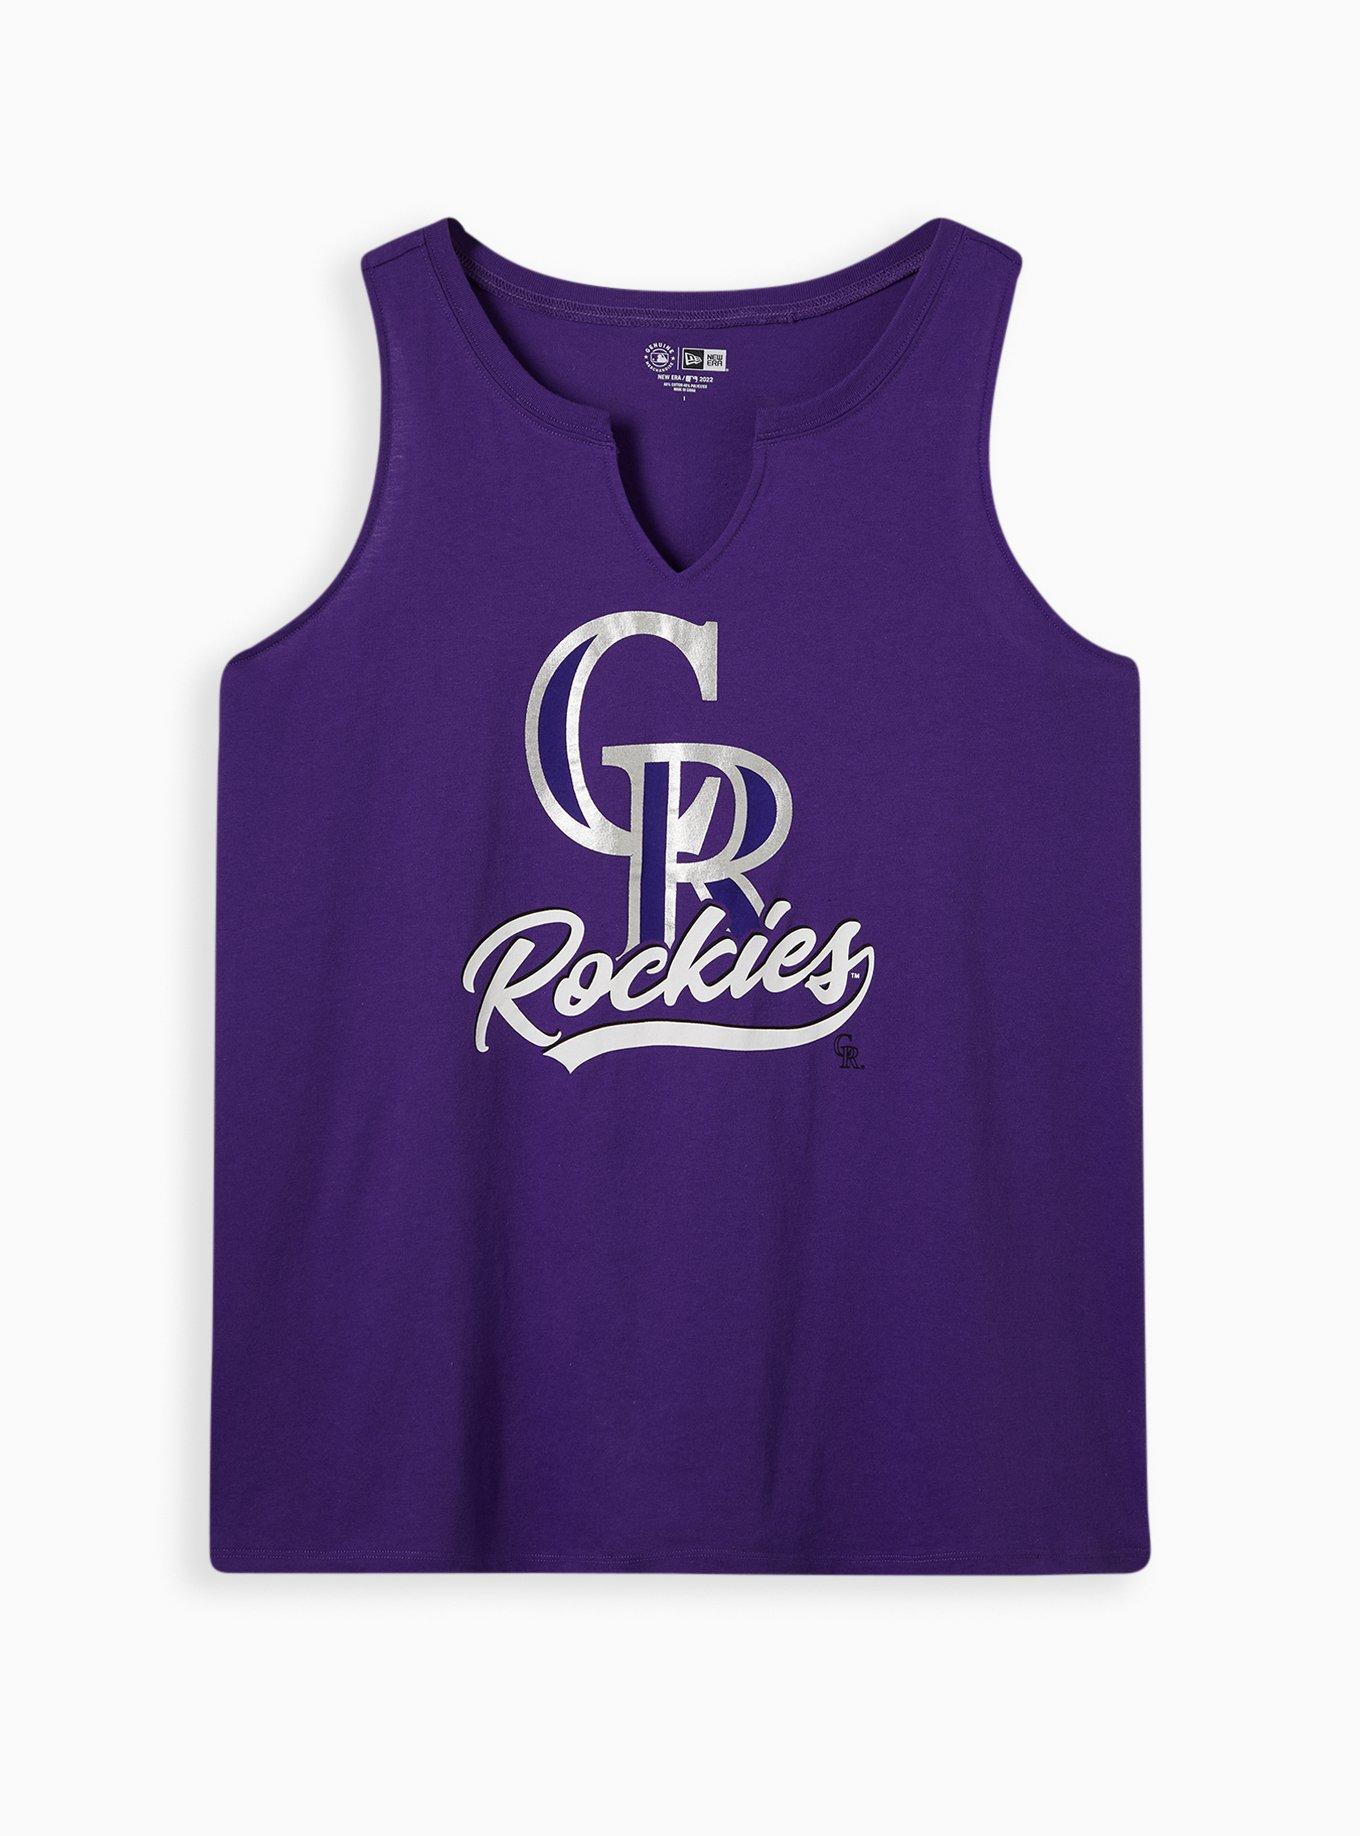 Nike Dri-FIT Right Mix (MLB Chicago Cubs) Women's High-Neck Tank Top.